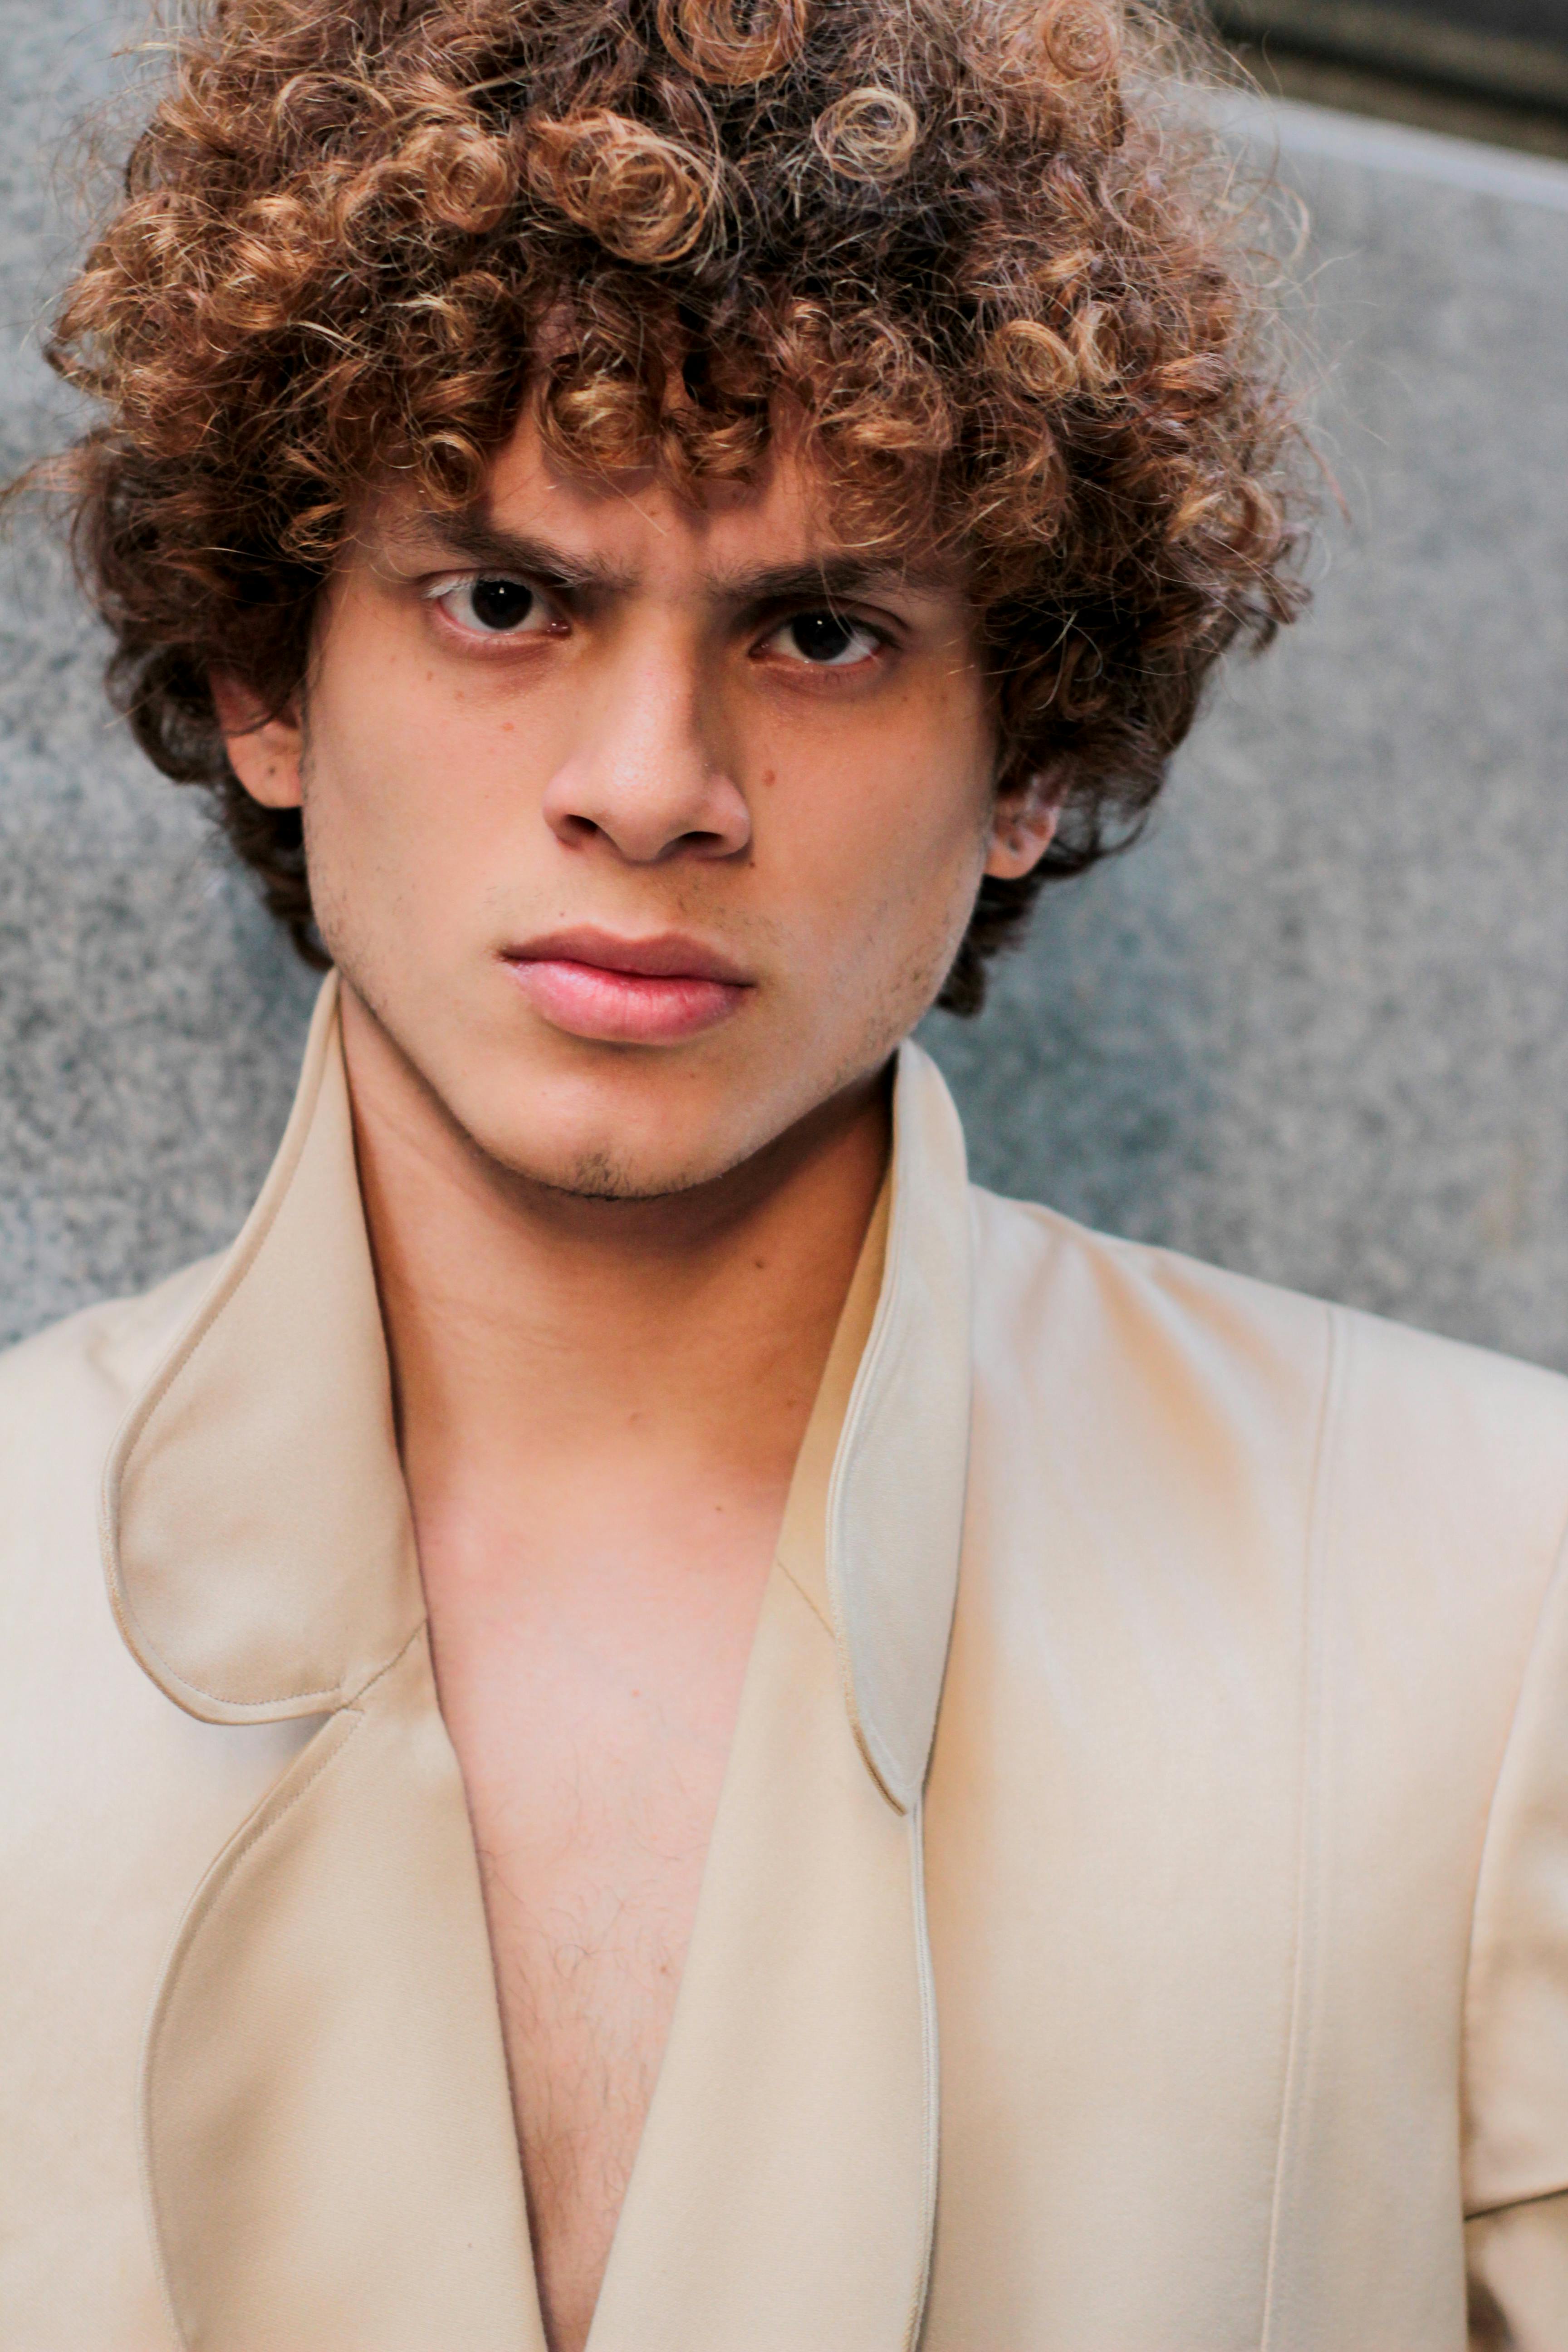 Curly Hair Men Photos, Download The BEST Free Curly Hair Men Stock Photos &  HD Images